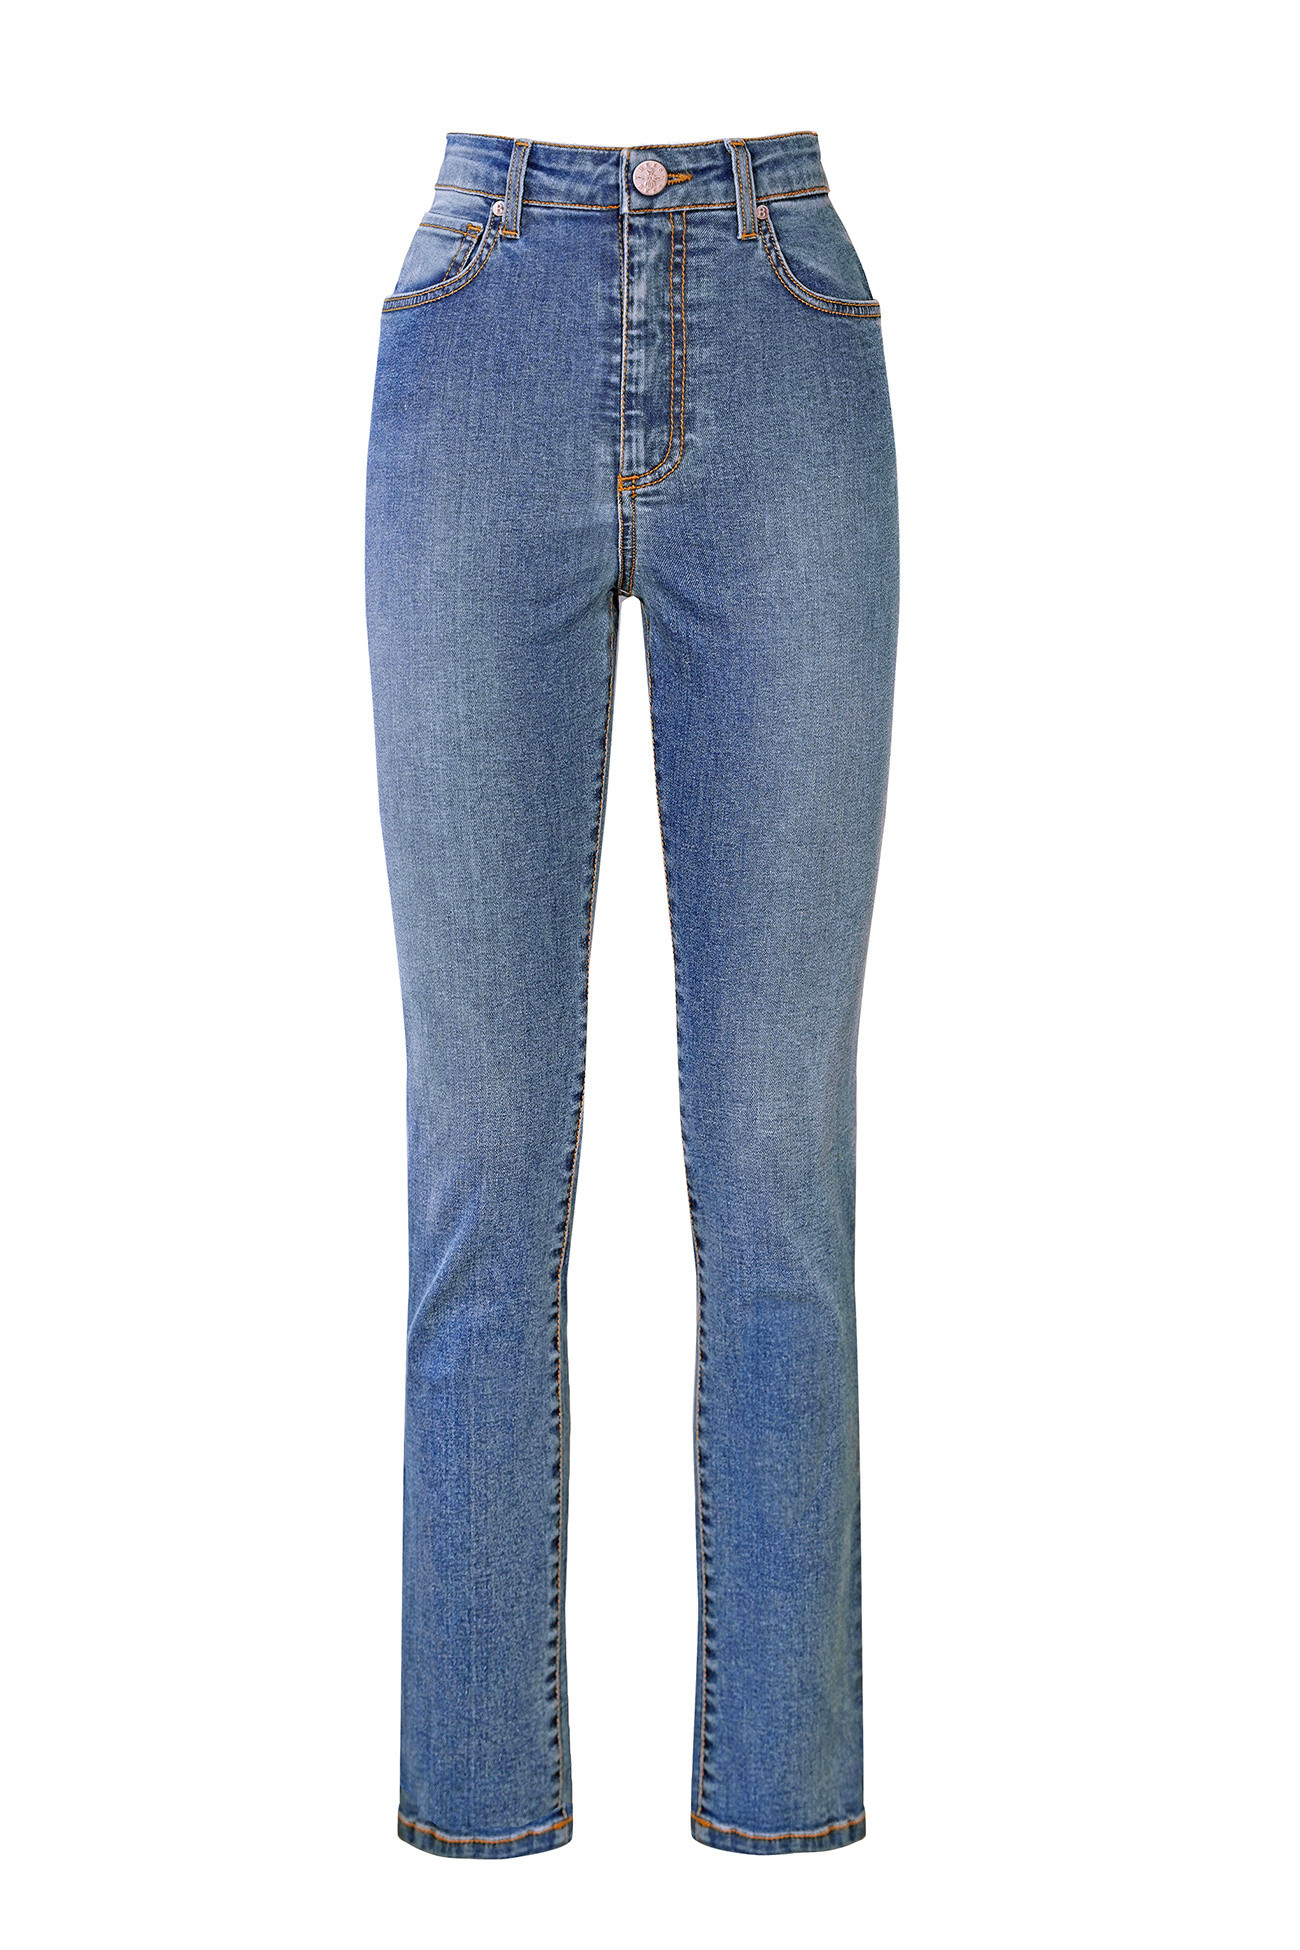 Bees - Iconic Jeans con fiocco, Denim, large image number 0